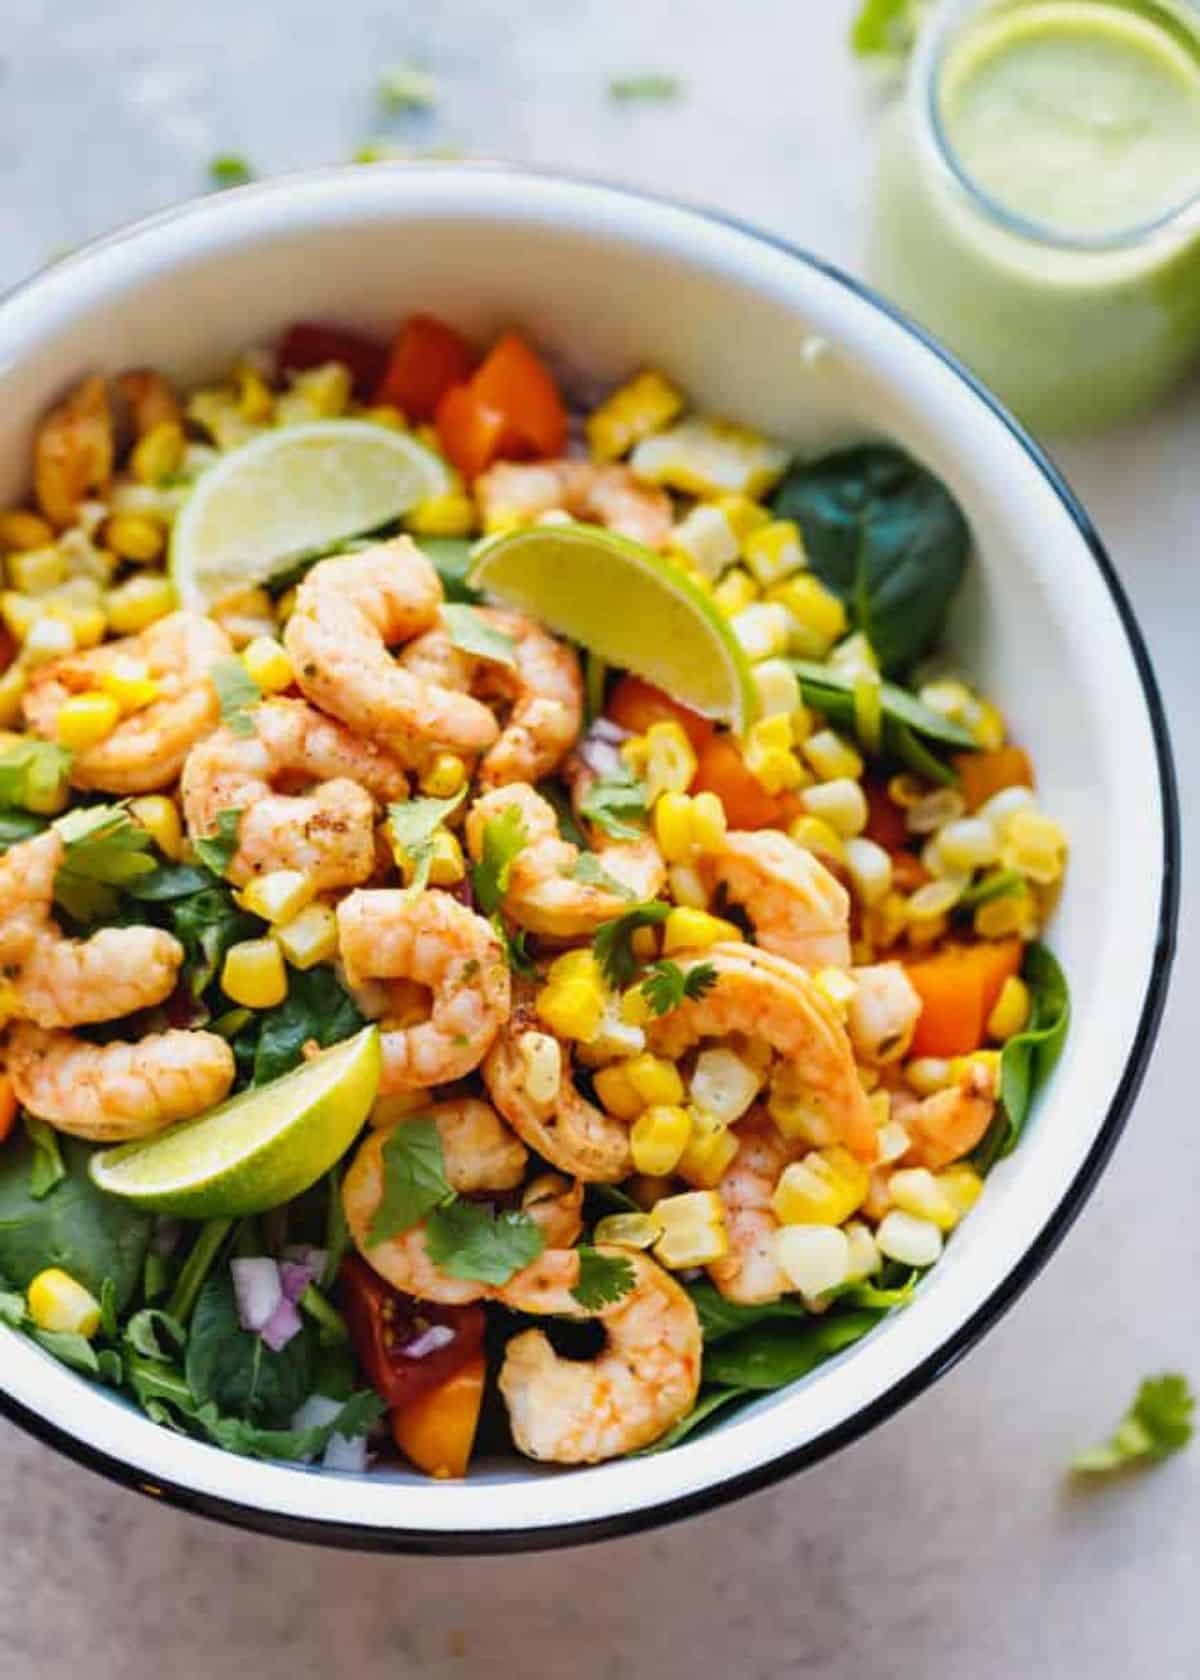 Tequila Lime Shrimp Salad with Cilantro Lime Dressing in a white bowl with a black edge.